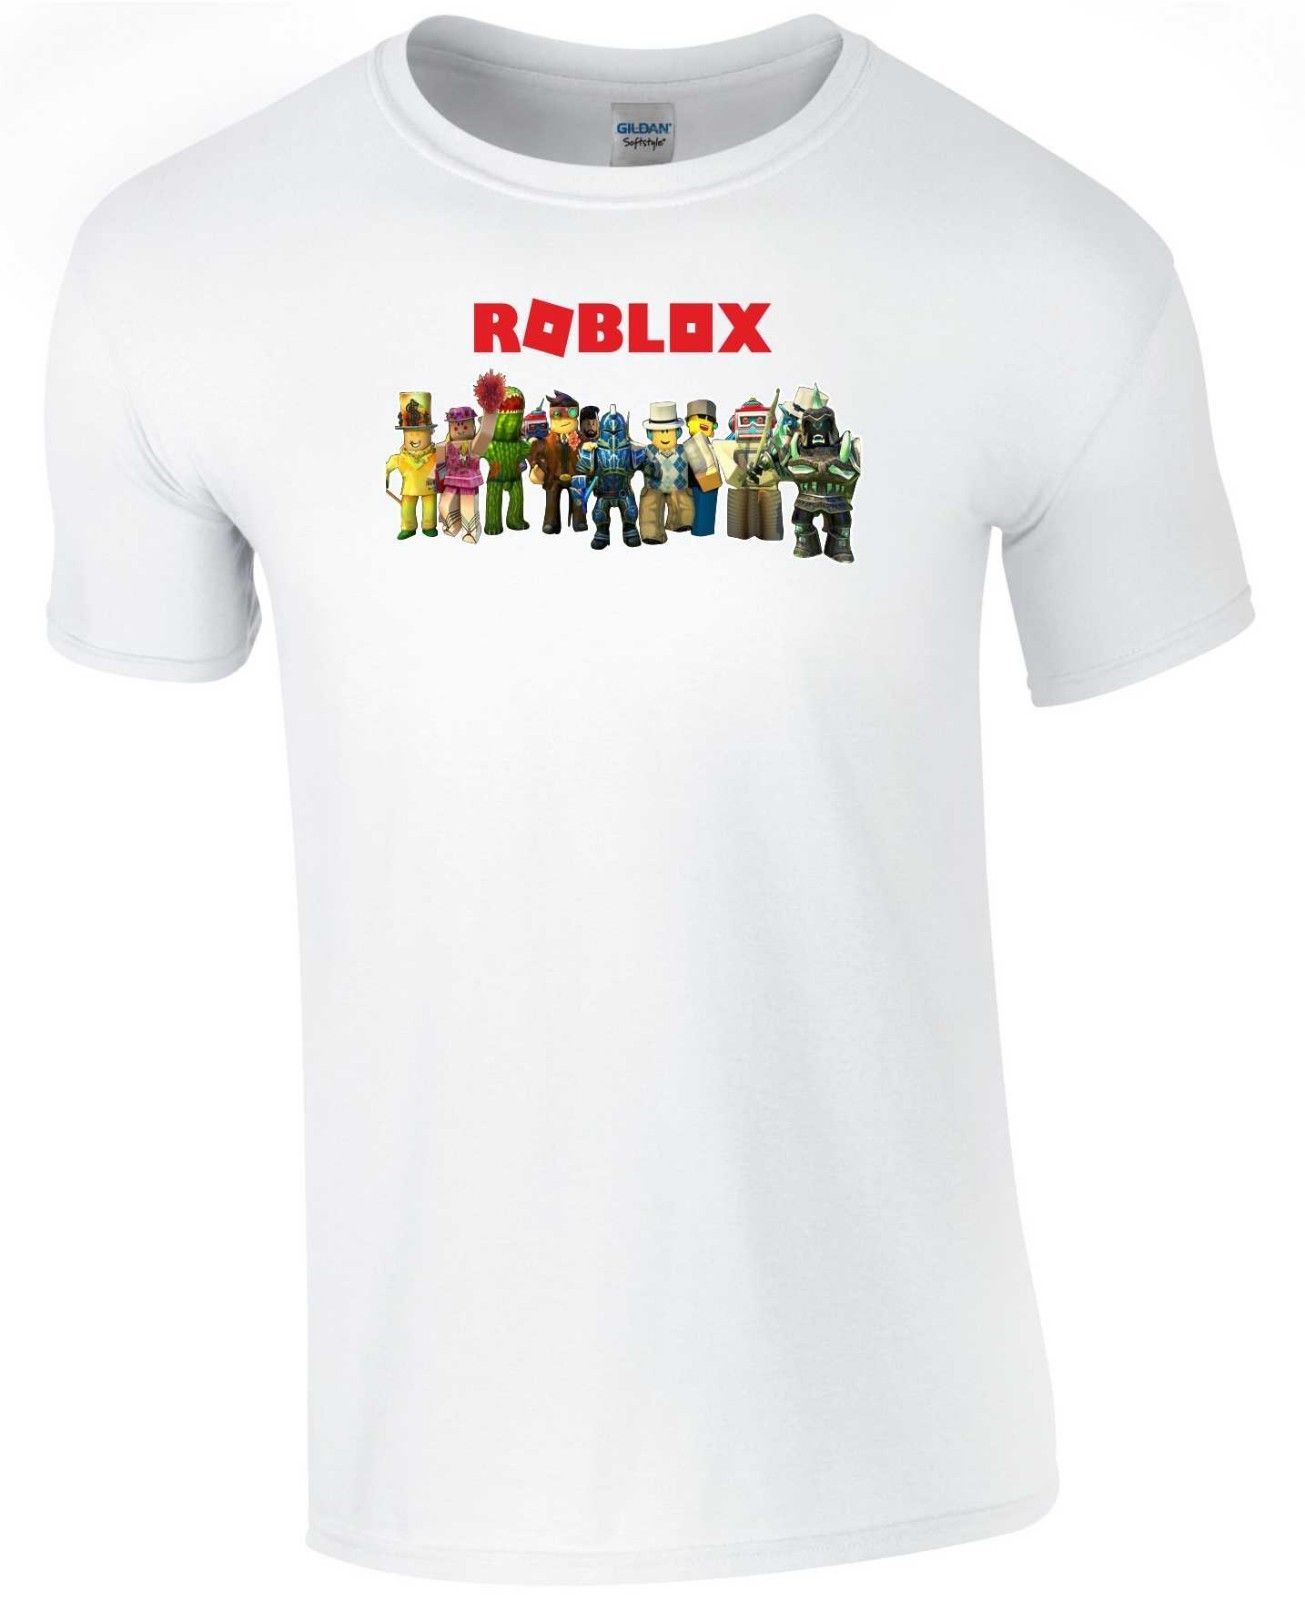 Roblox T Shirt Prison Life Builder Video Games Funny Joke Gift Kids - roblox t shirt prison life builder video games funny joke gift kids children top t shirts shopping online t shirts sites !   from limitlessprints